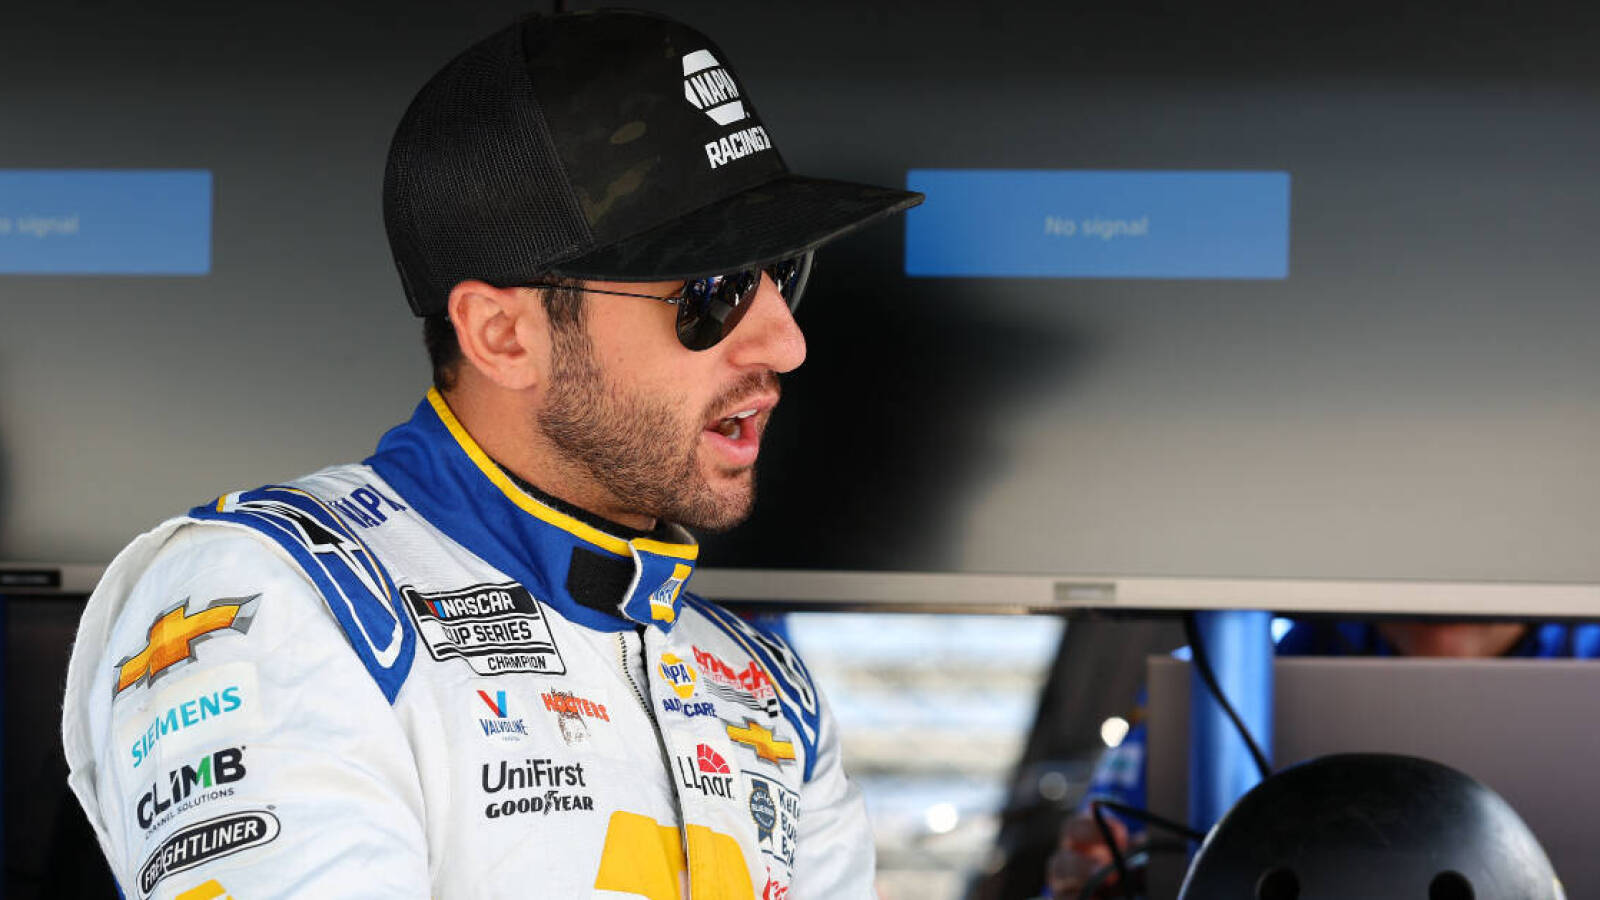 Chase Elliott confronted Mike Rockenfeller post-race for blocking him during Verizon 200